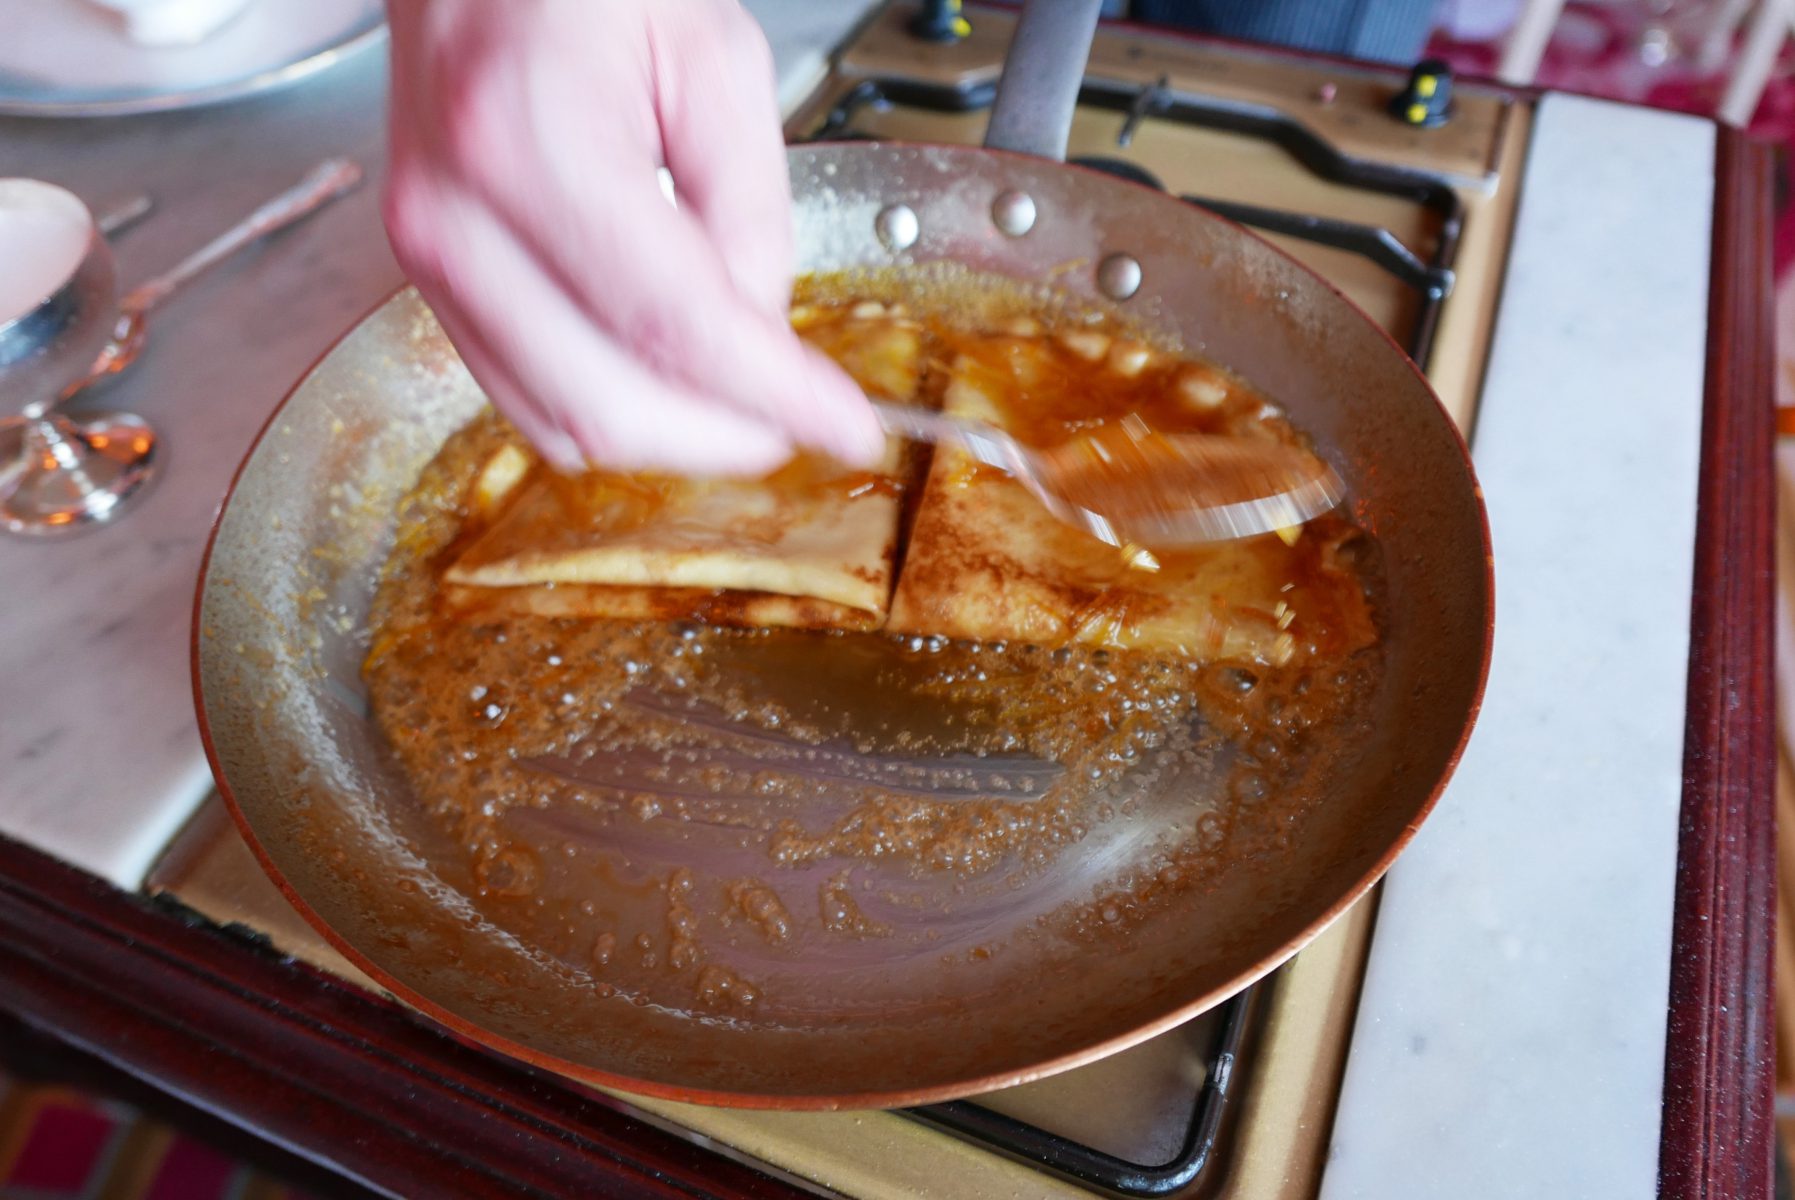 Crêpes Suzette in the making